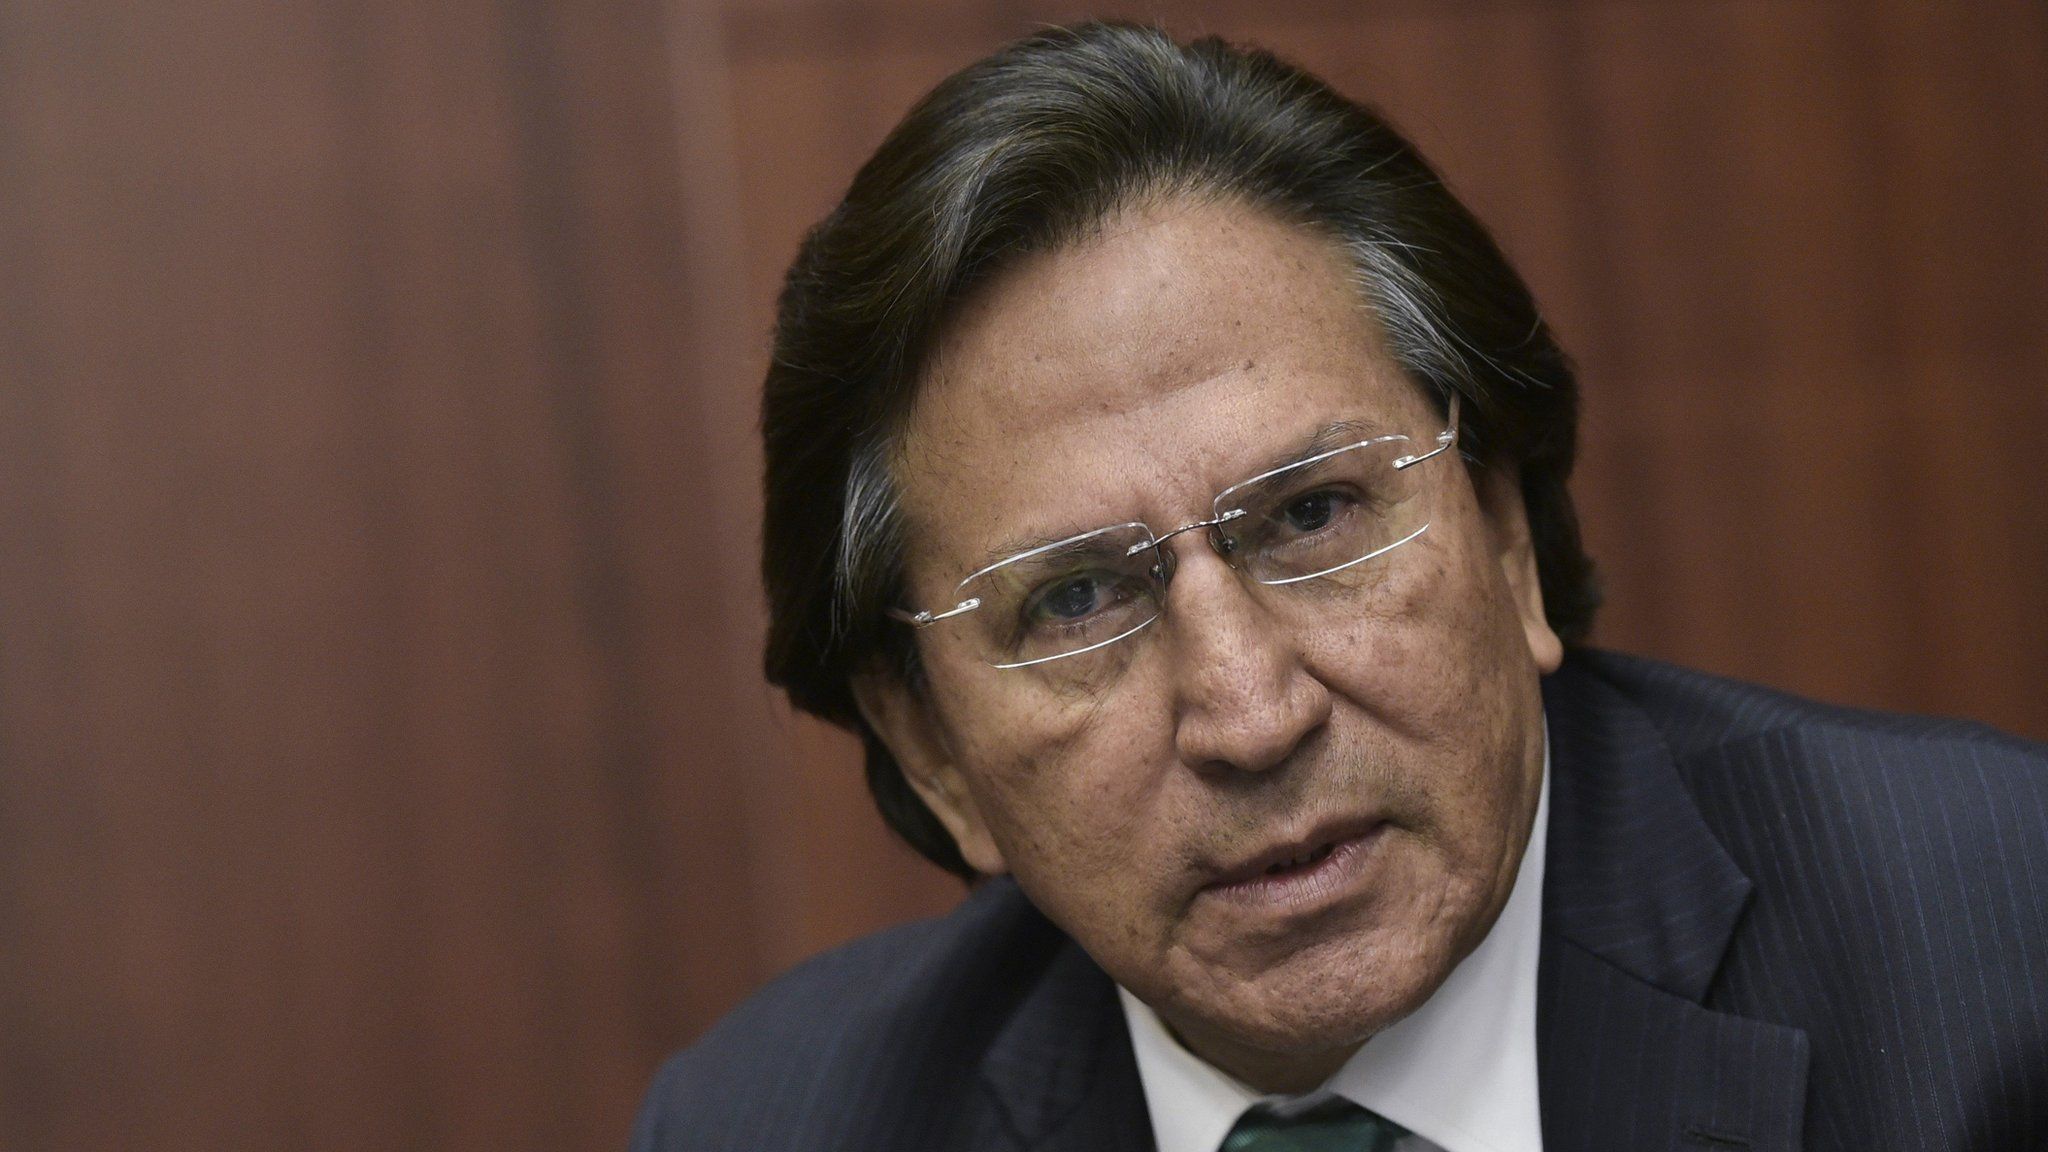 Former President of Peru Alejandro Toledo speaks during a discussion on Venezuela and the OAS at The Center for Strategic and International Studies (CSIS) on June 17, 2016 in Washington, DC.